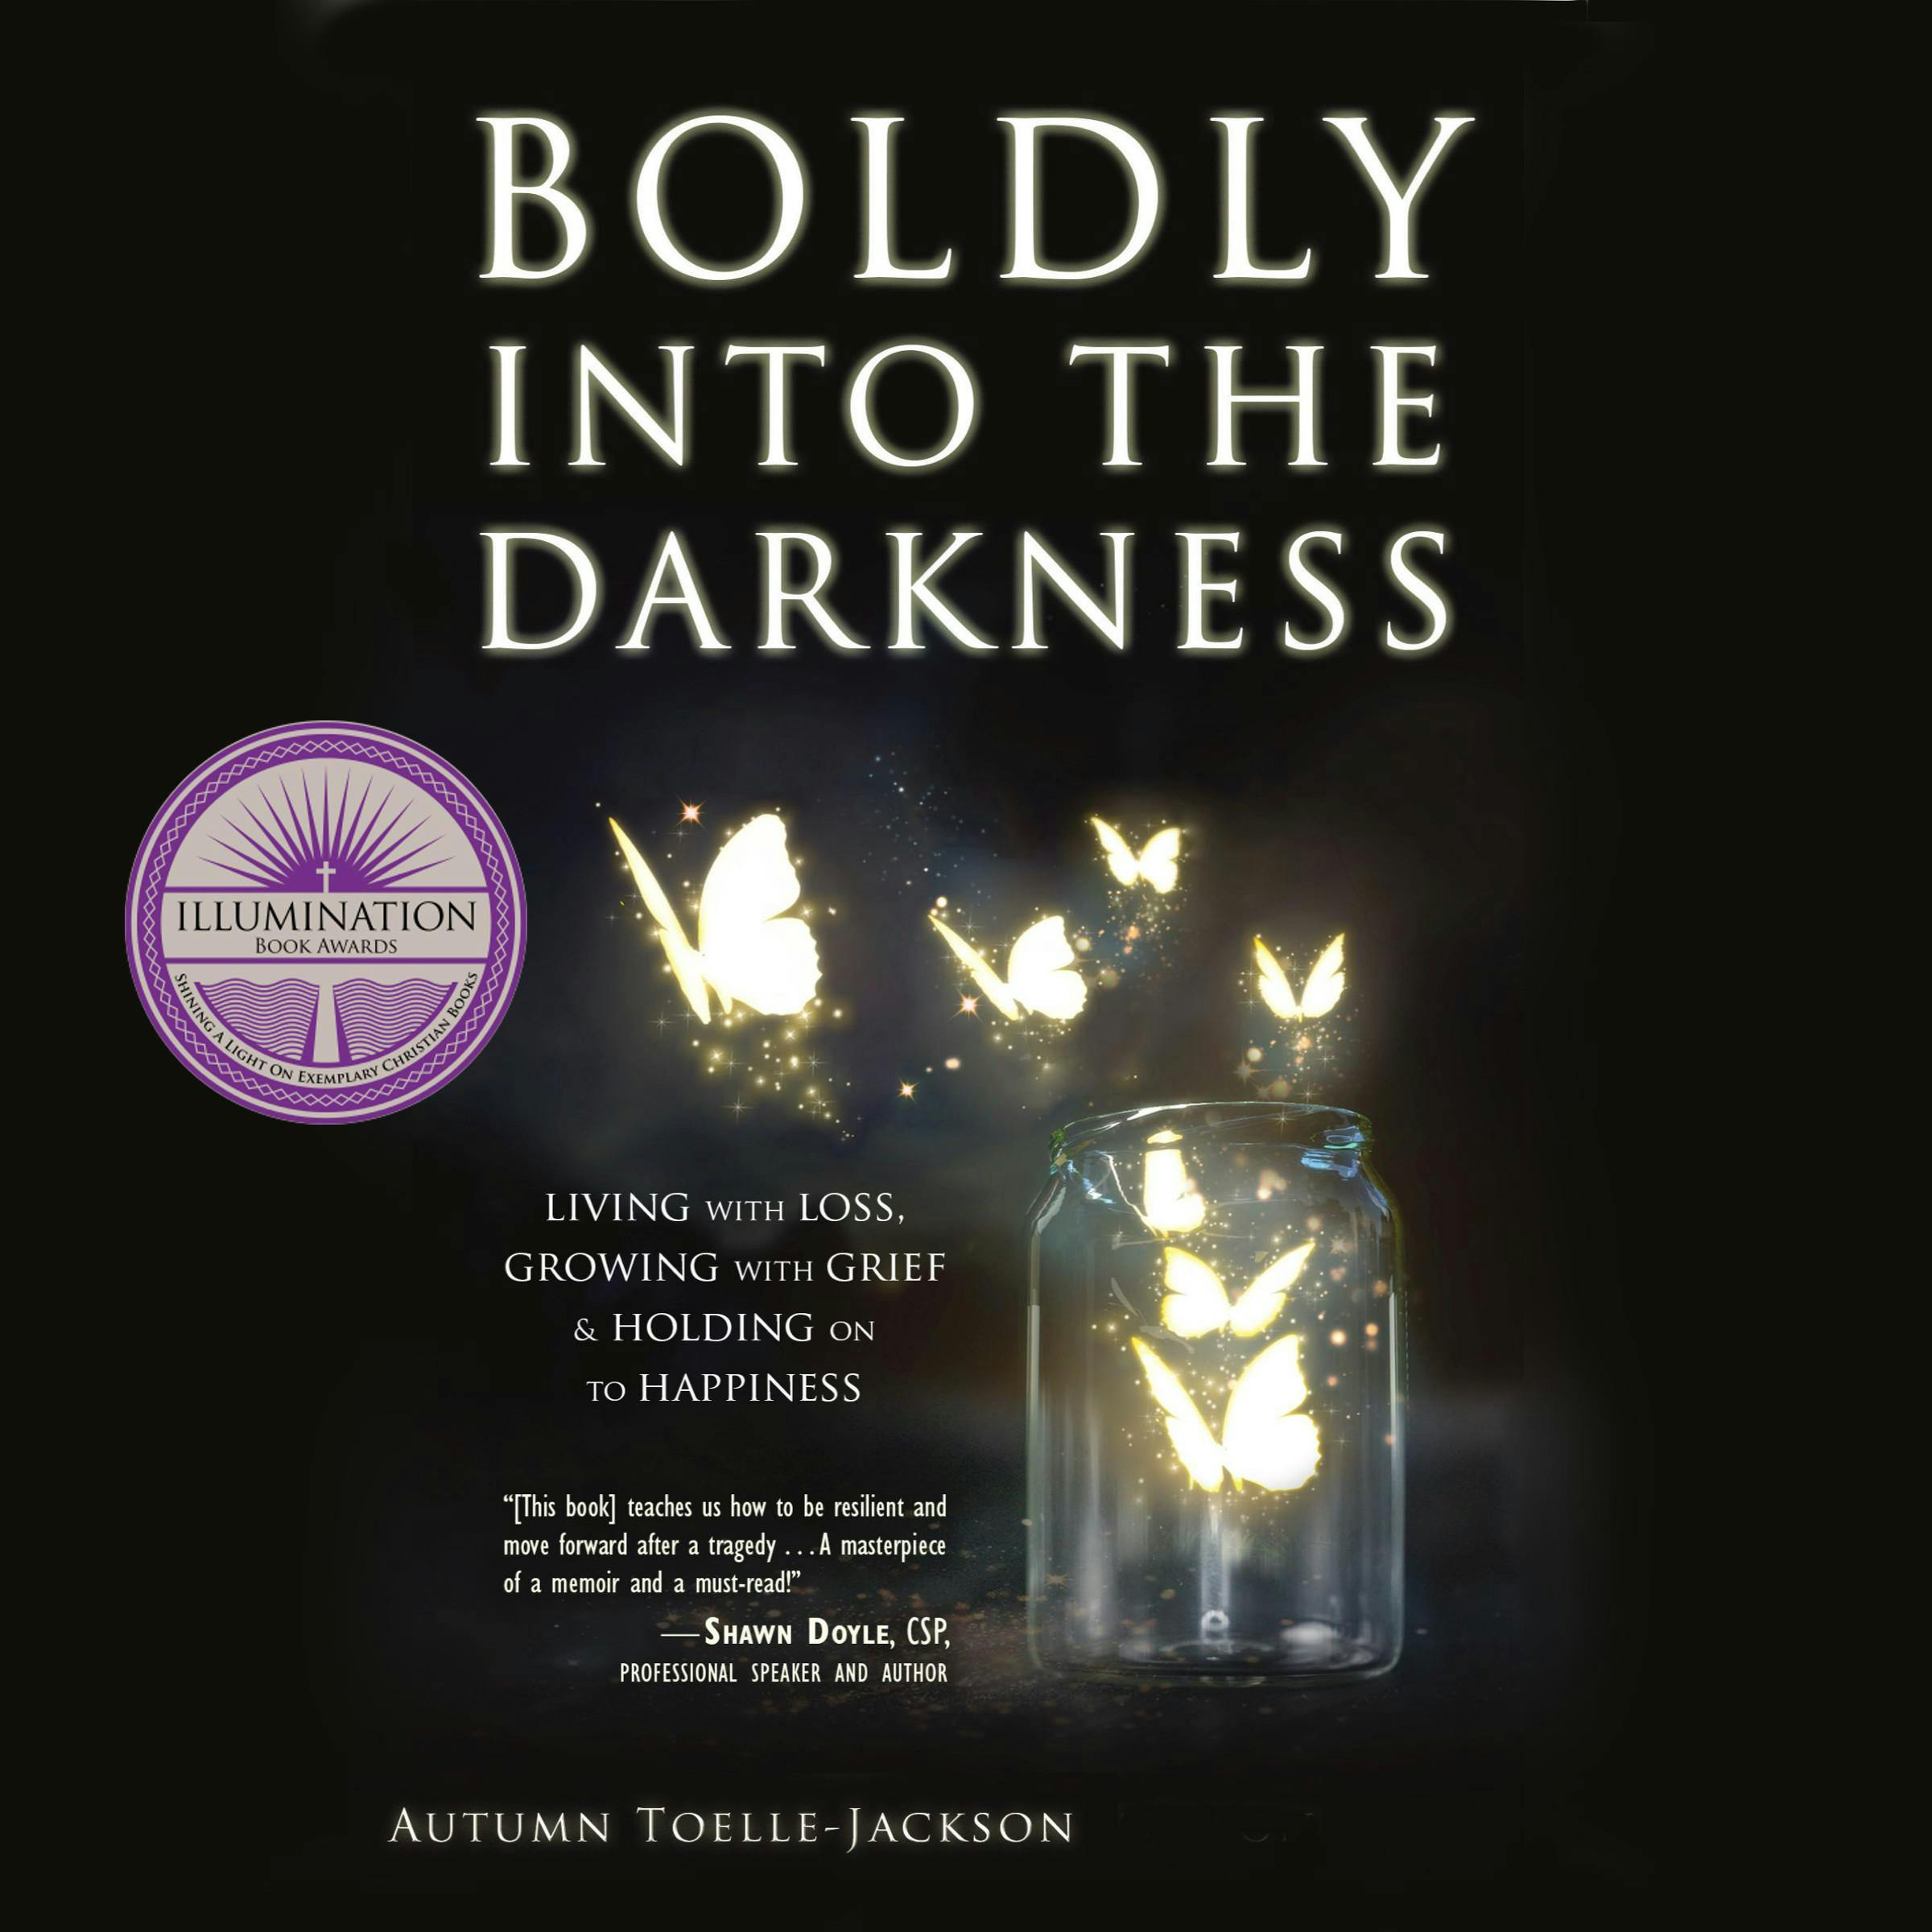 Boldly into the Darkness: Living with Loss, Growing with Grief & Holding on to Happiness - Autumn Toelle-Jackson